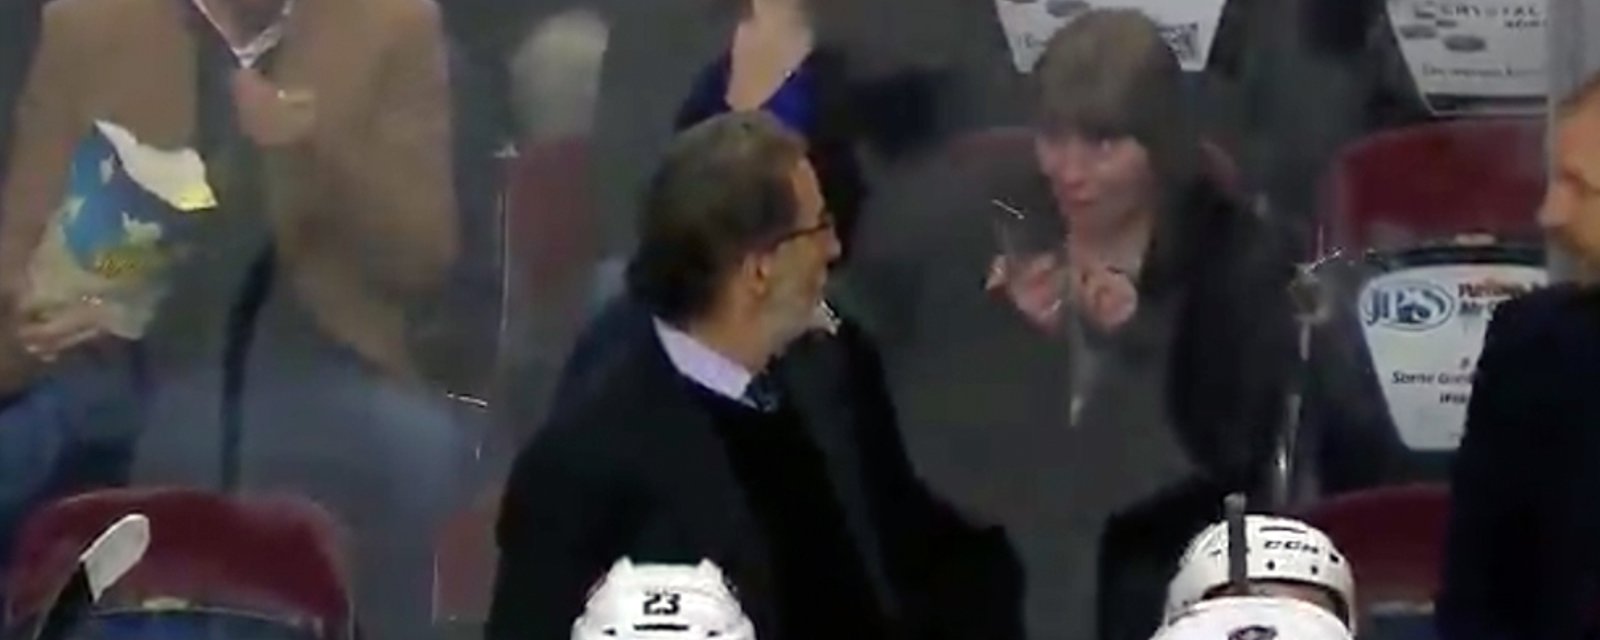 Tortorella shuts down a fan who asks him for a selfie mid-game